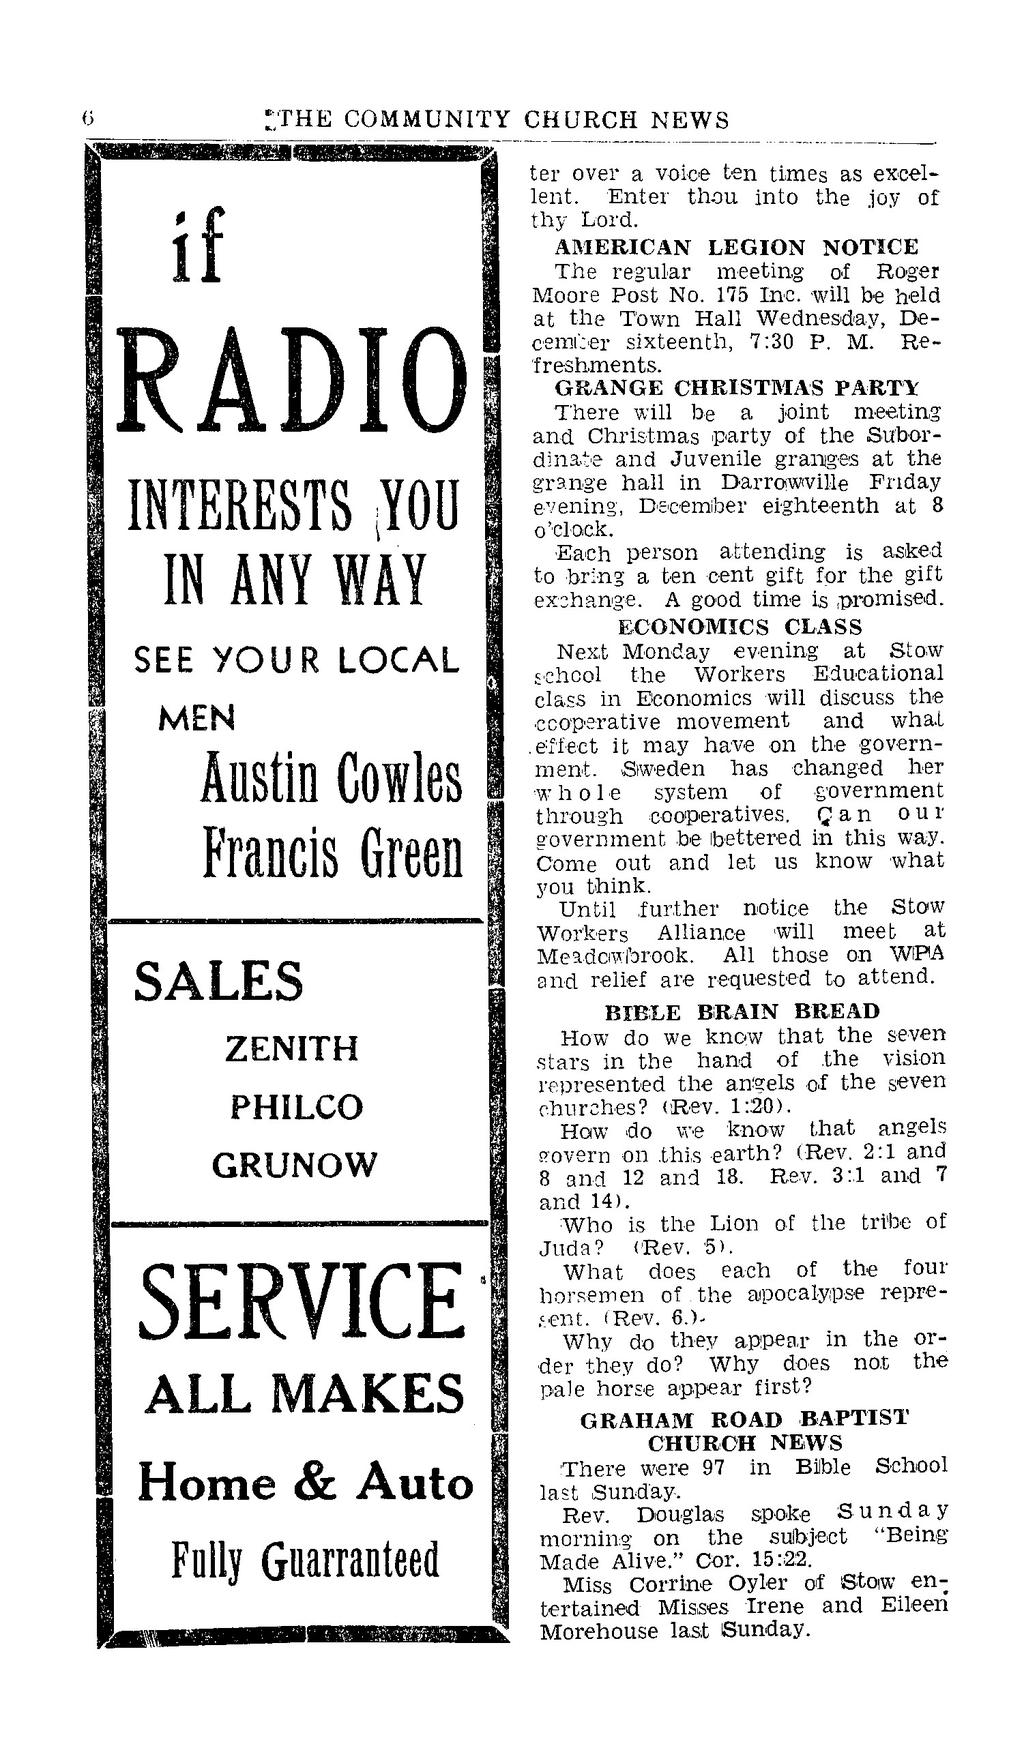 6 :.THE COMMUNITY CHURCH NEWS if RADIO INTERESTS ;Y0U IN ANY WAY SEE YOUR LOCAL MEN Austin Cowles Francis Green SALES ZENITH PHILCO GRUNOW SERVICE ALL MAKES Home & Auto Fully Guaranteed ter over a